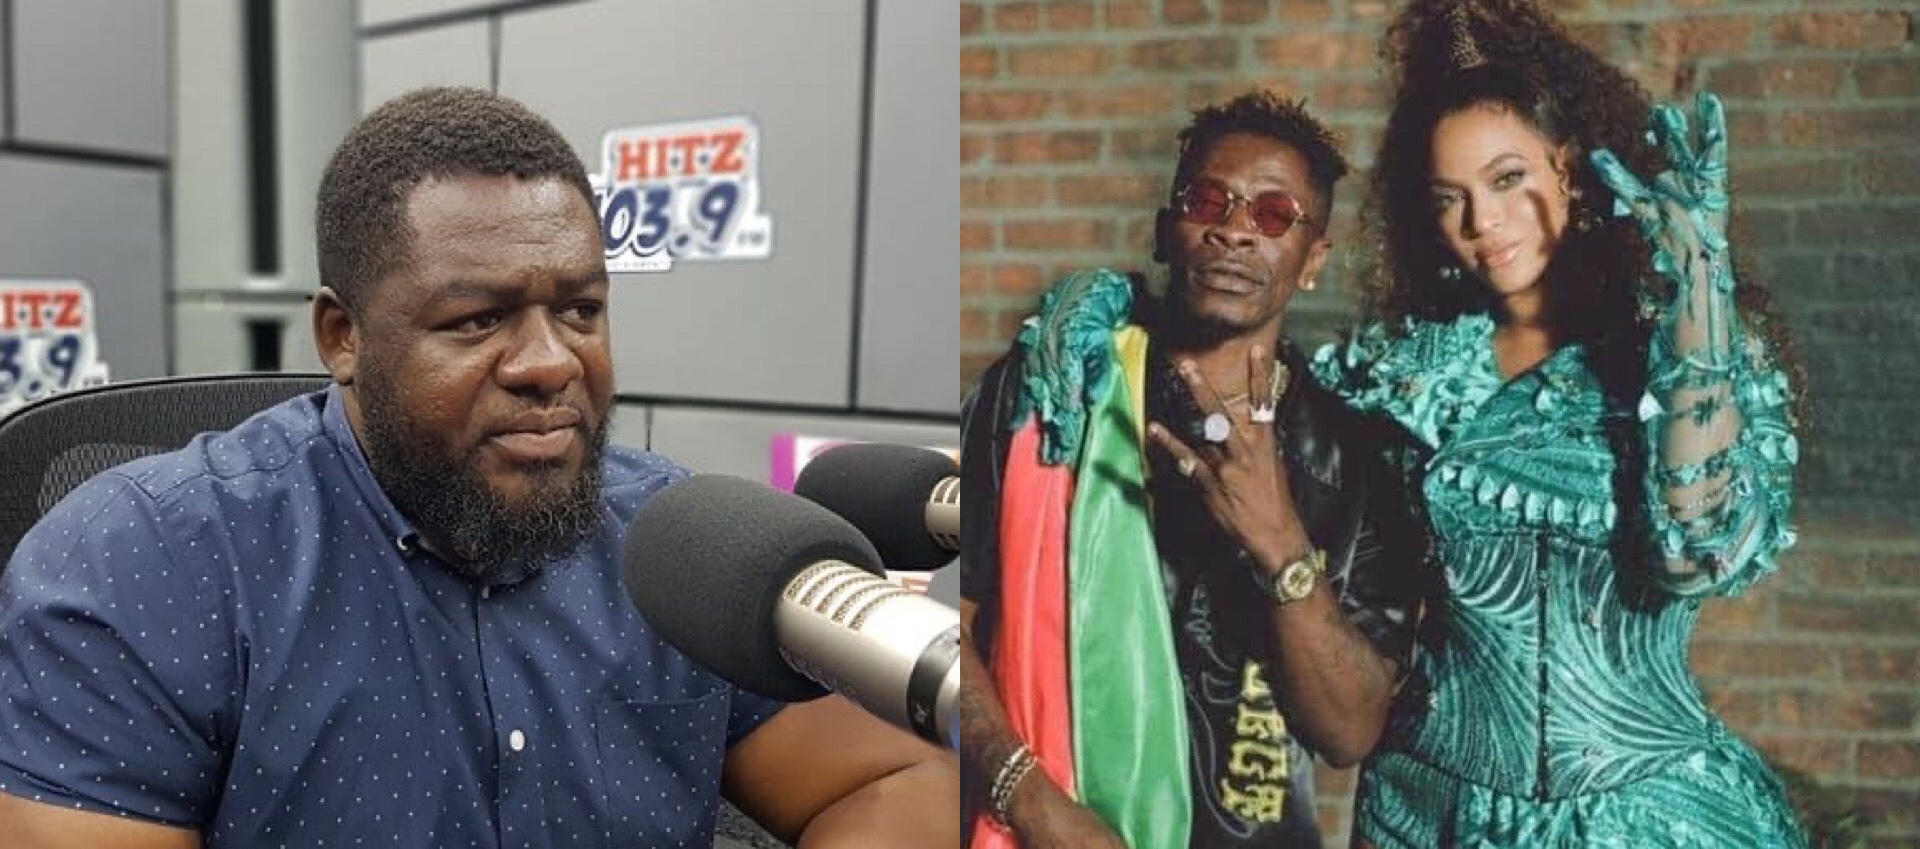 Beyonce Never Came To Ghana For The Shoot Of ‘Already’ Music Video – Shatta Wale’s Manager, Bulldog Reveals